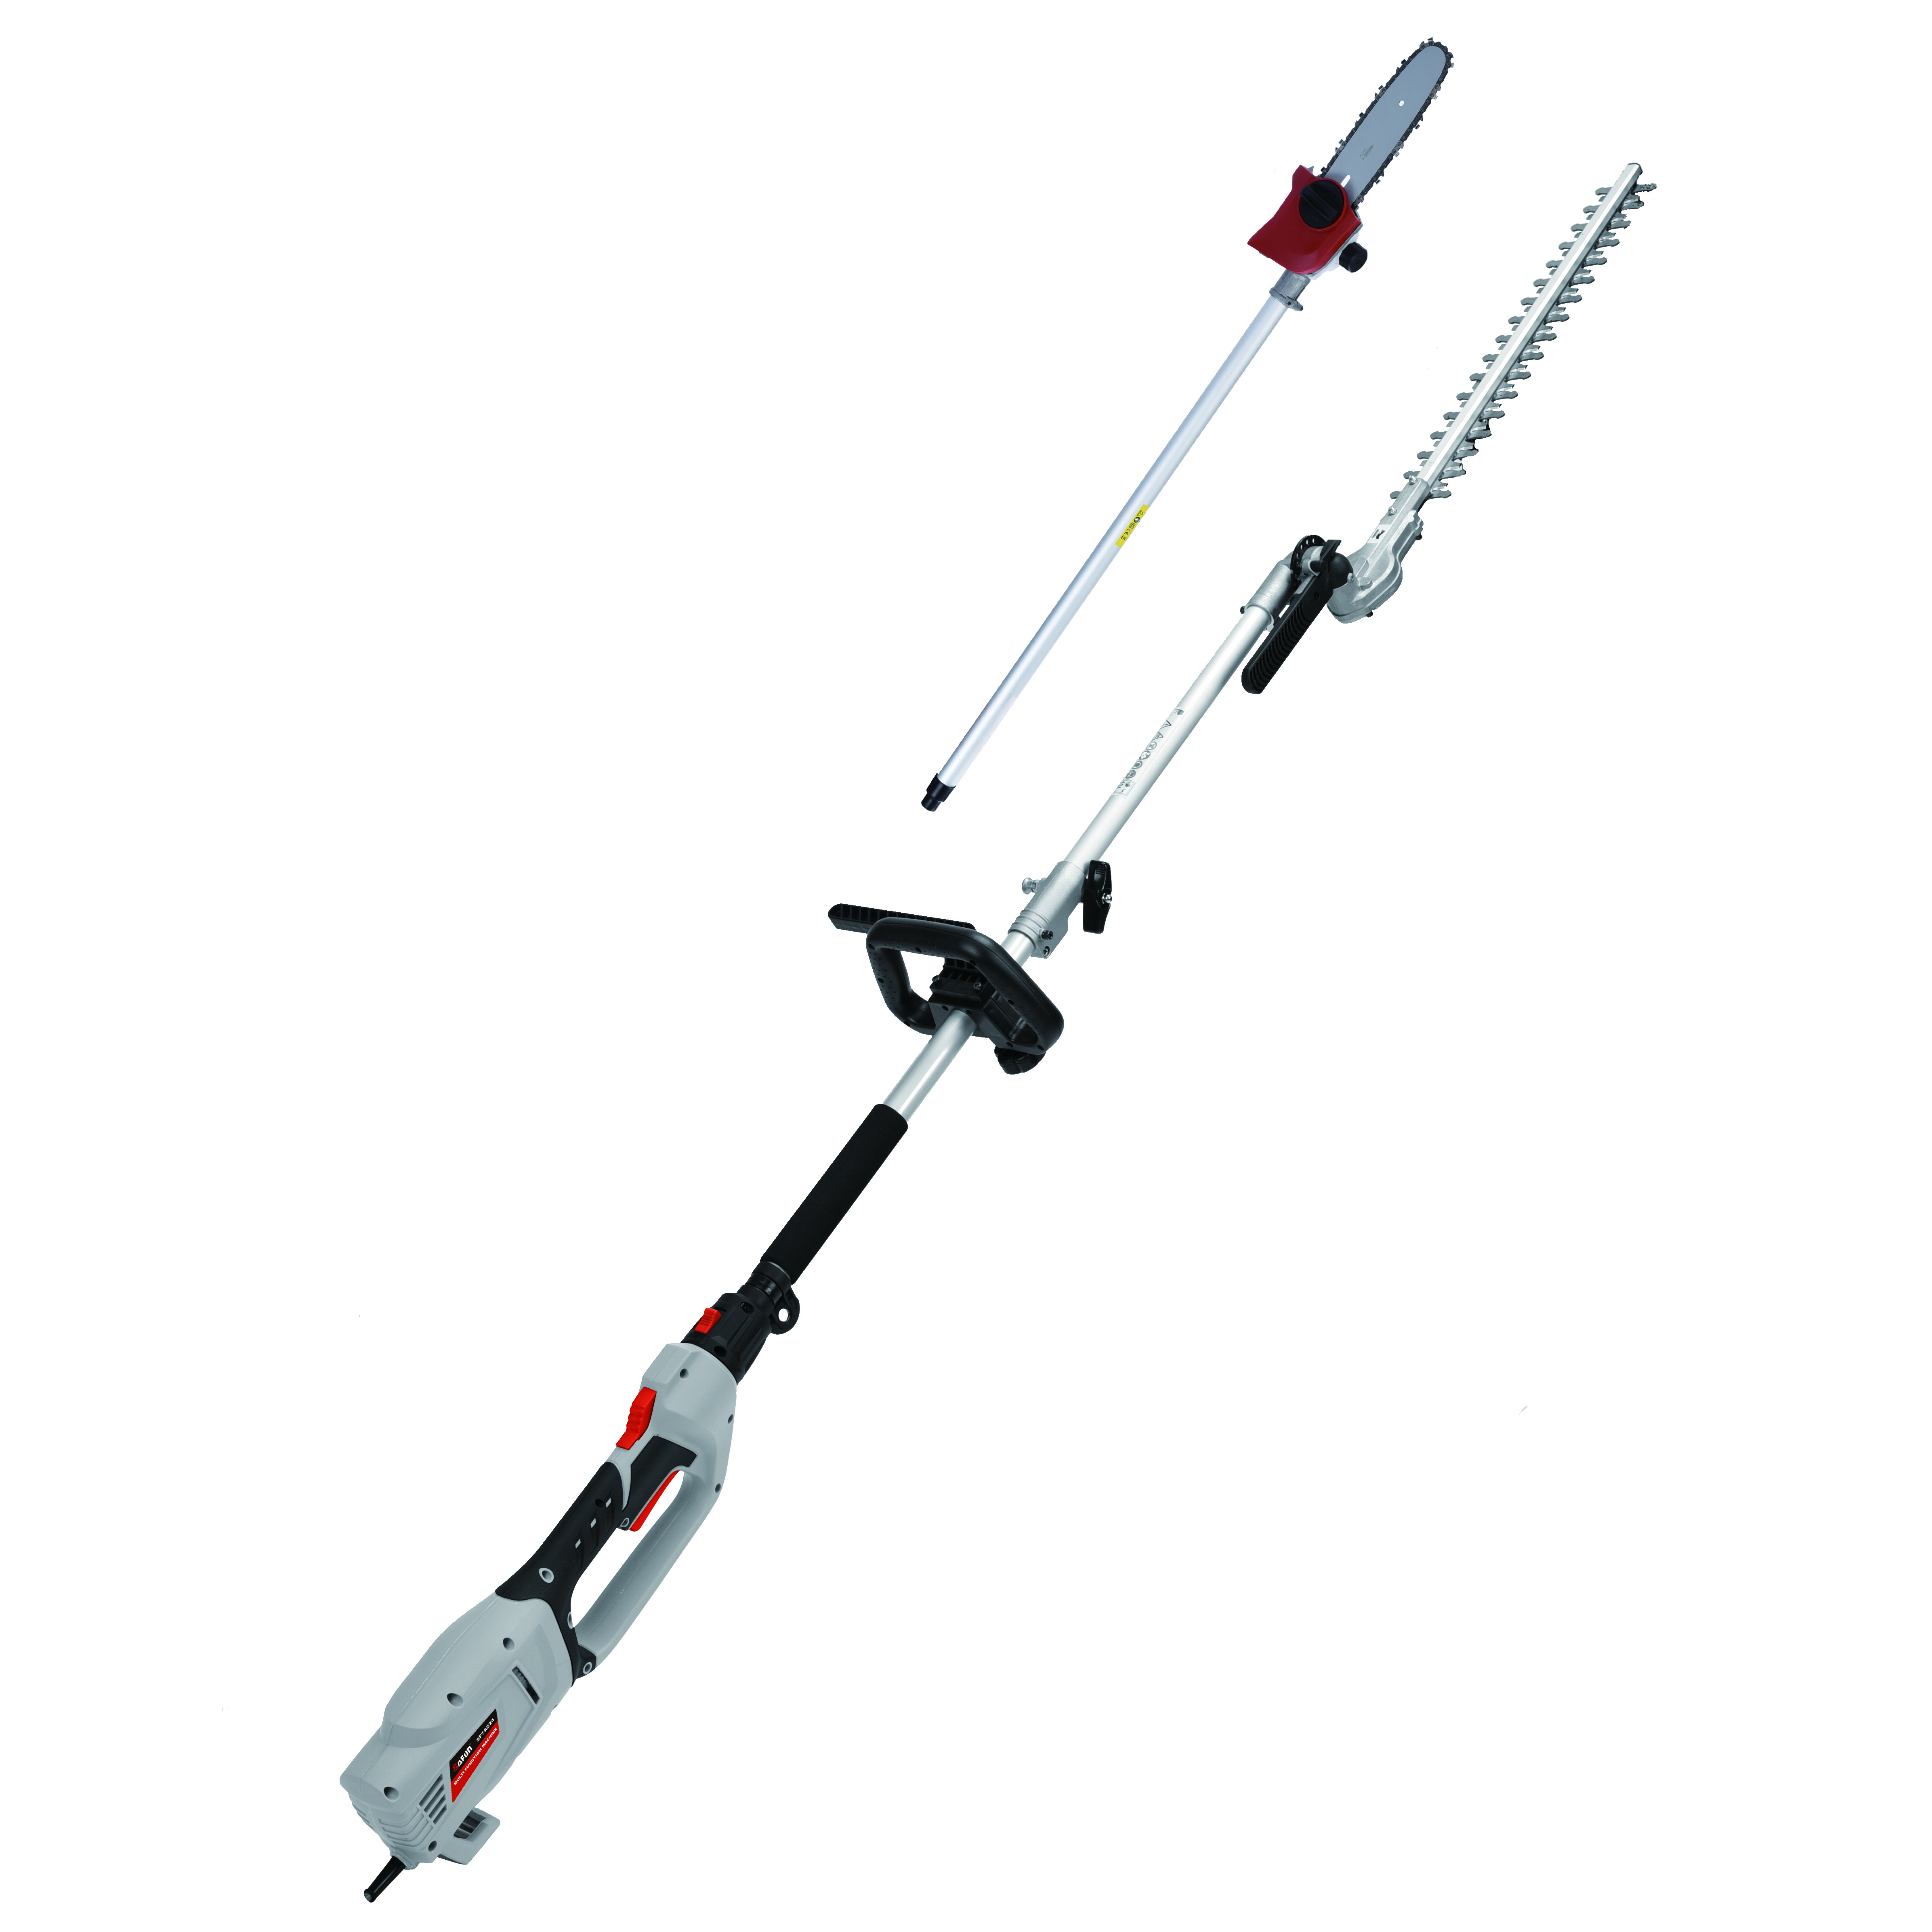 Electric Pole Saw & Hedge Trimmer 2 IN 1